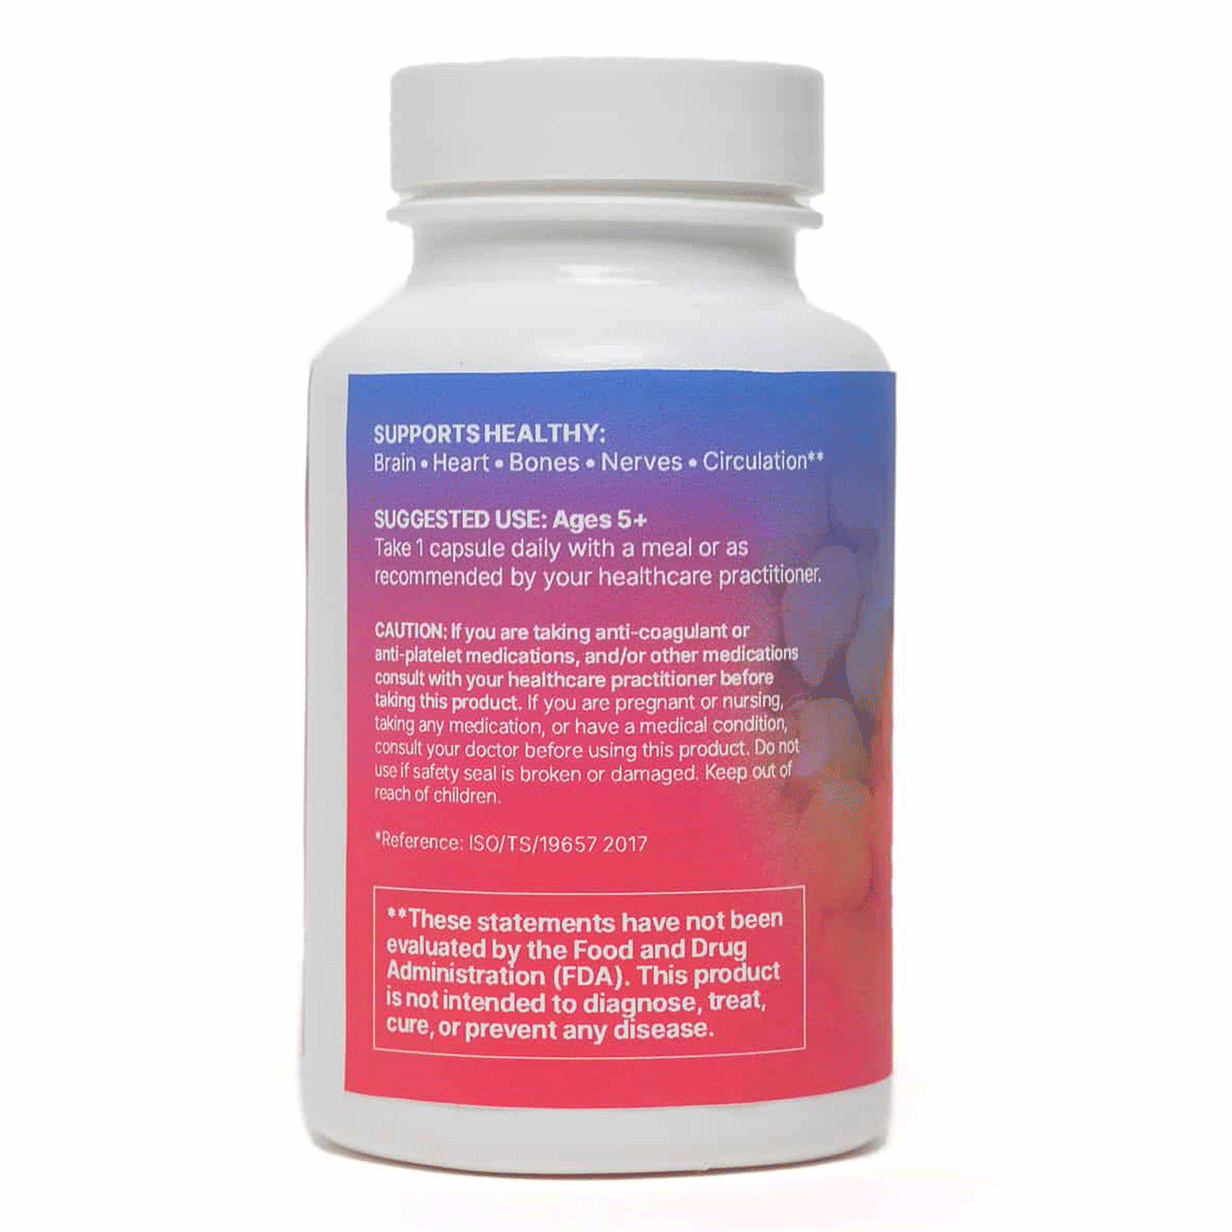 MegaQuinone K2-7 by Microbiome Labs Suggested Use